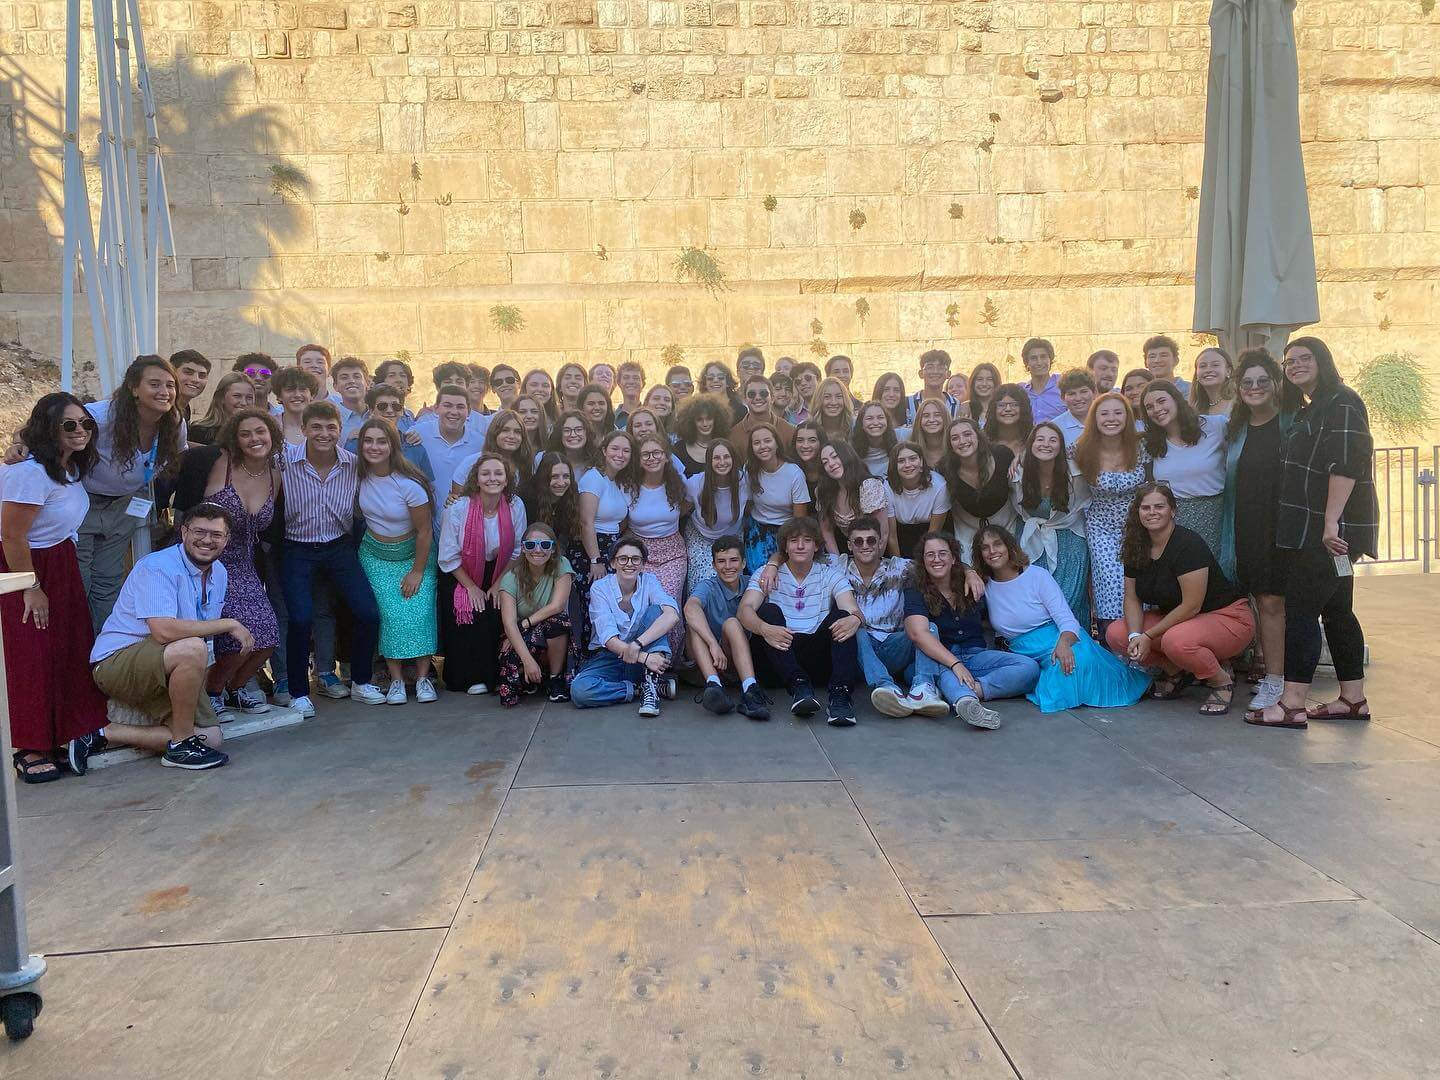 Shabbat Shalom: A Special Note From Jillian Feiger, Director of Jewish Student Connection & IST